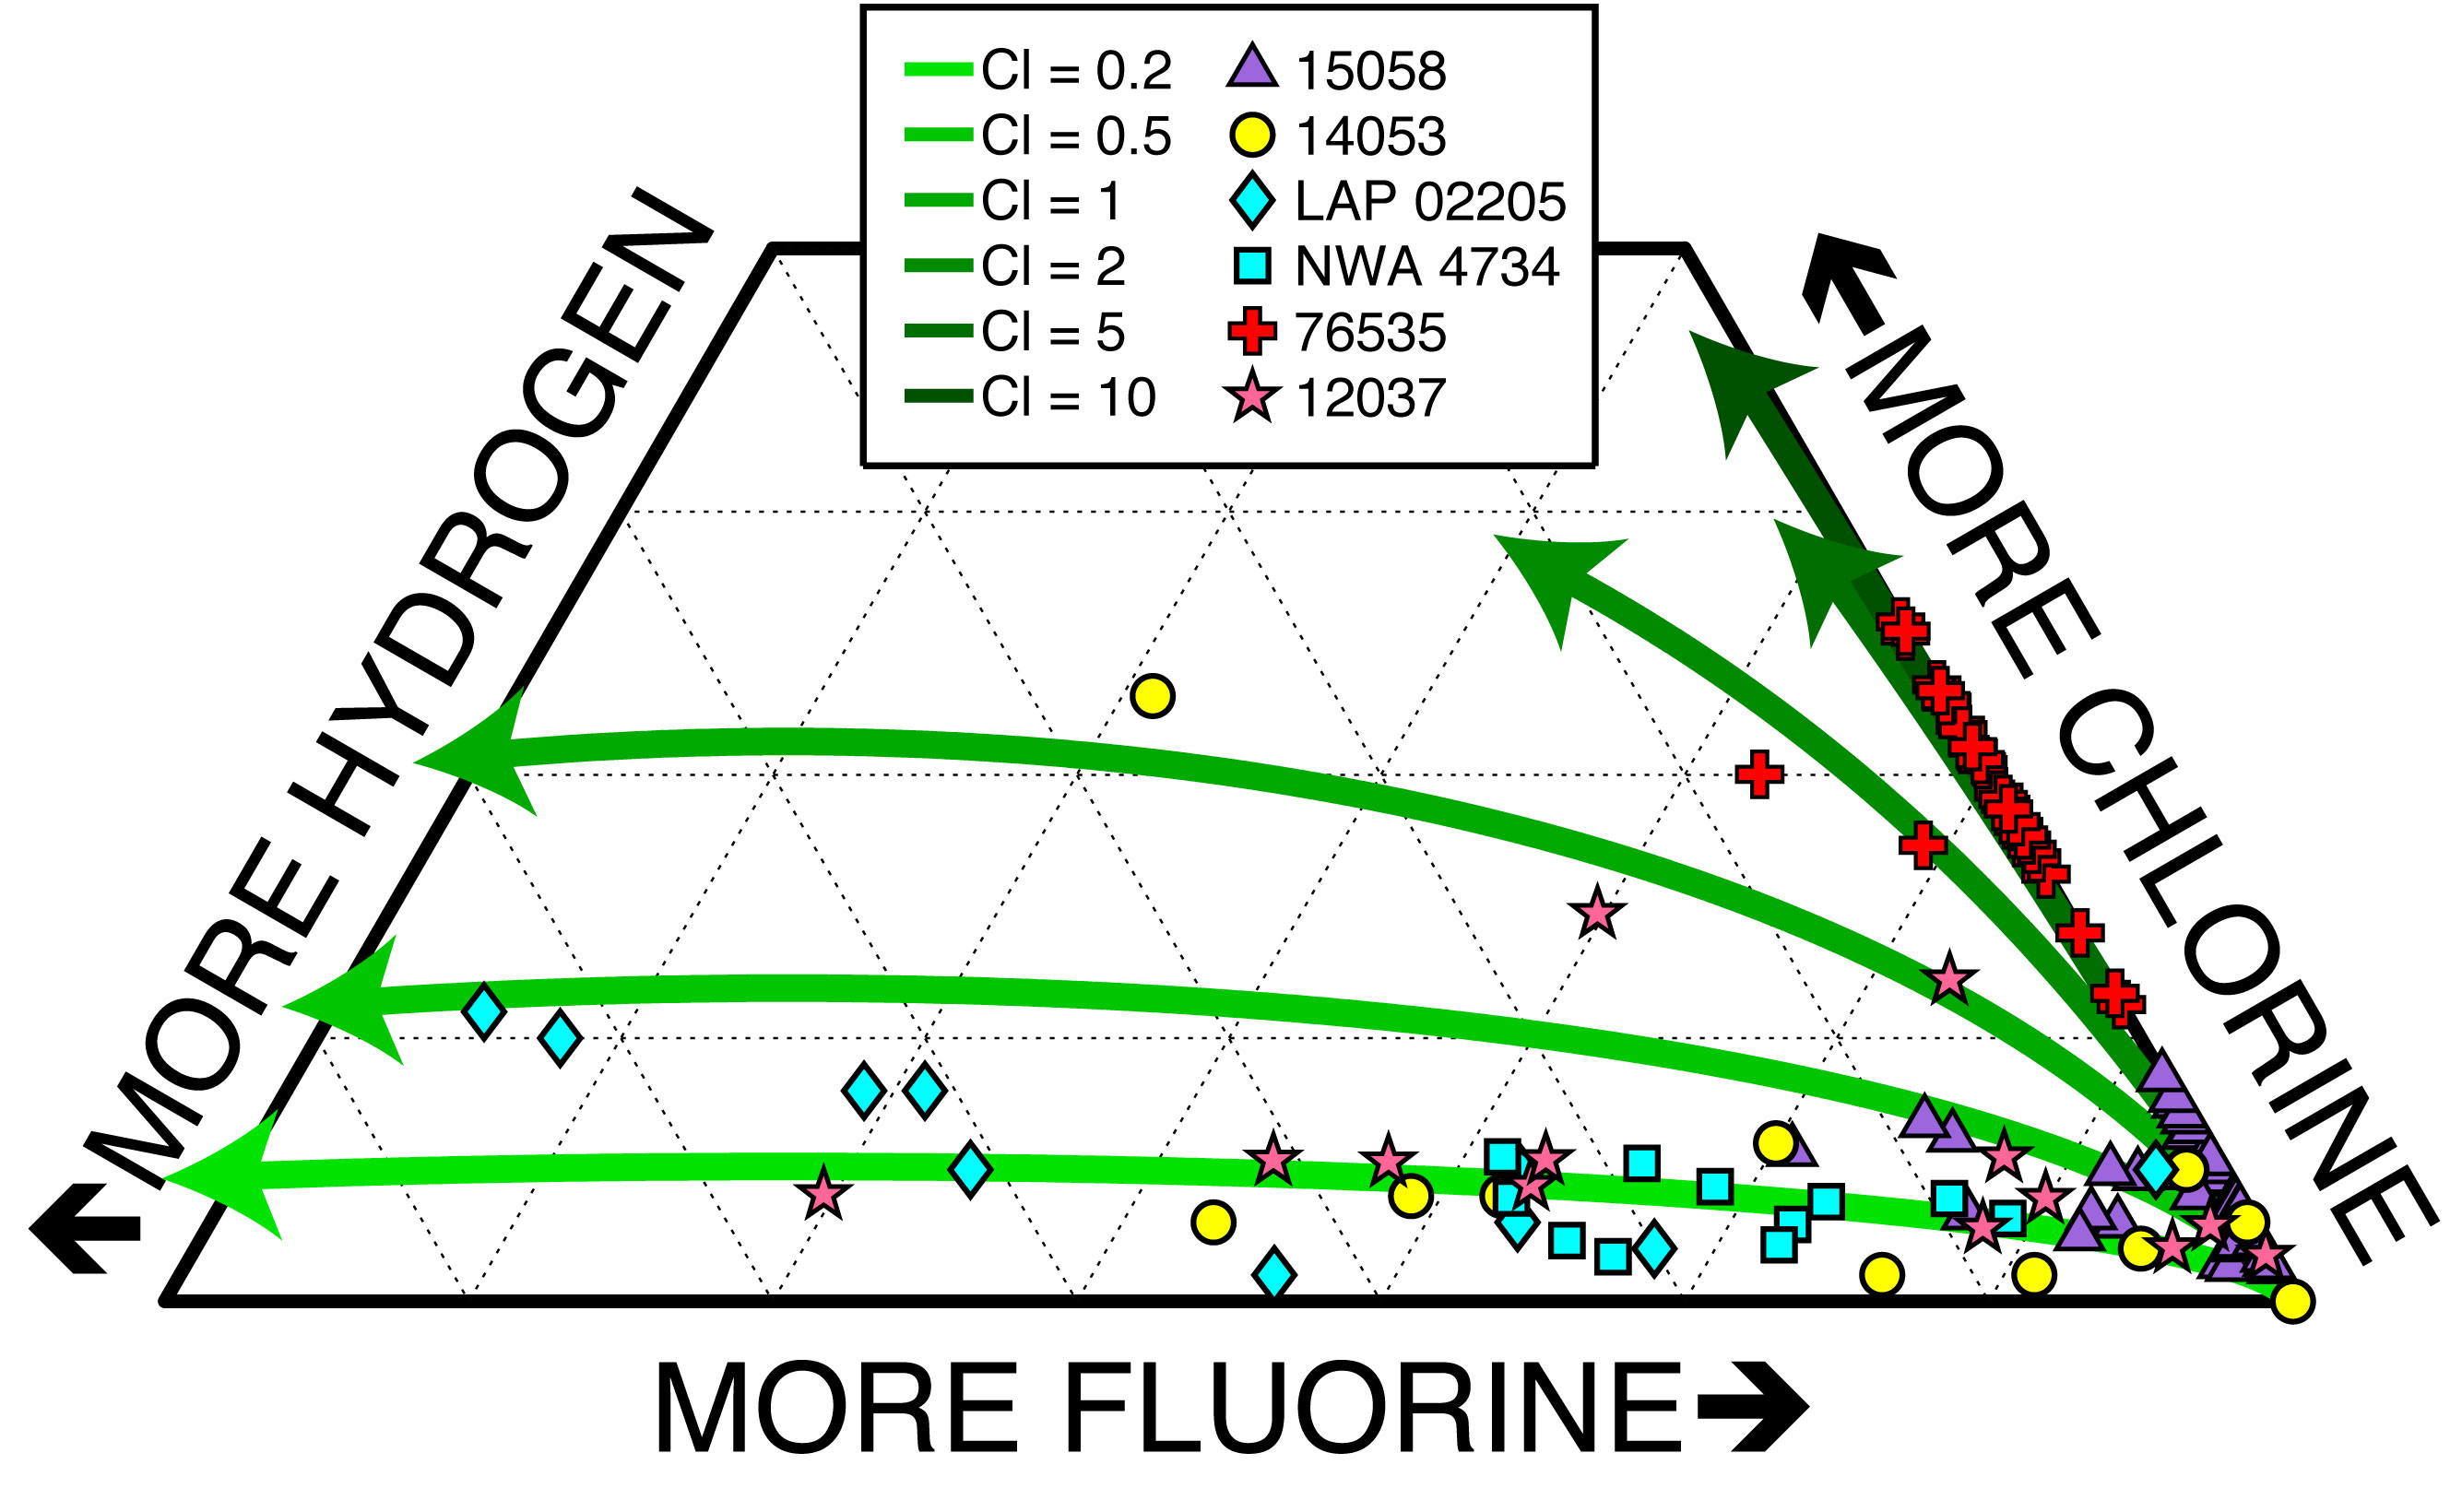 Measurements of hydrogen, fluorine, and chlorine in different lunar samples are shown as different symbols. Green curves represent how composition of apatite changes because of fractional crystallization. Shades of green depict models with different amounts of Cl, but all models have identical water. Changing the amount of fractional crystallization and the Cl content, one can model any apatite found now on the Moon, whether water rich or water poor—but all could have come from magmas with the same water content. Thus, apatite is a poor indicator of magmatic water. Credit: Jeremy Boyce, UCLA